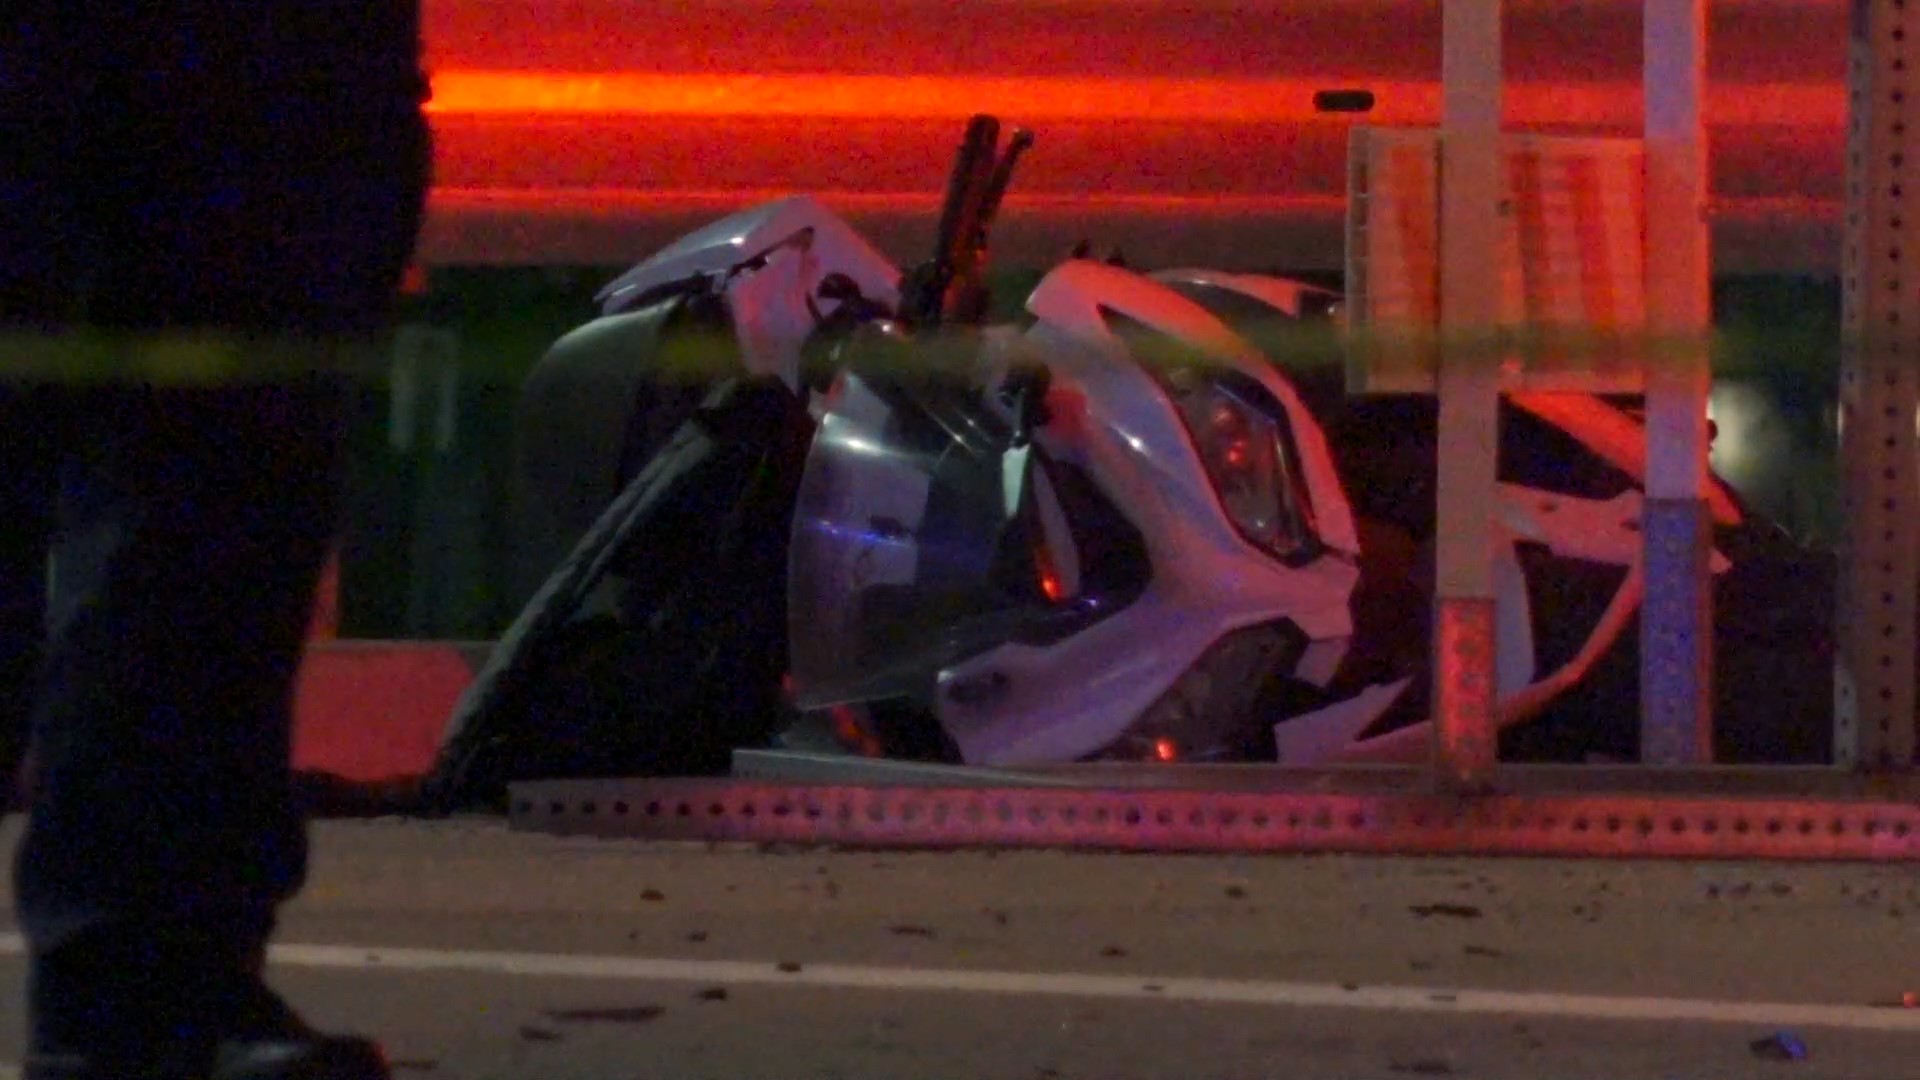 Houston police are looking for the driver who allegedly ran a red light and struck and killed a motorcyclist late Sunday.